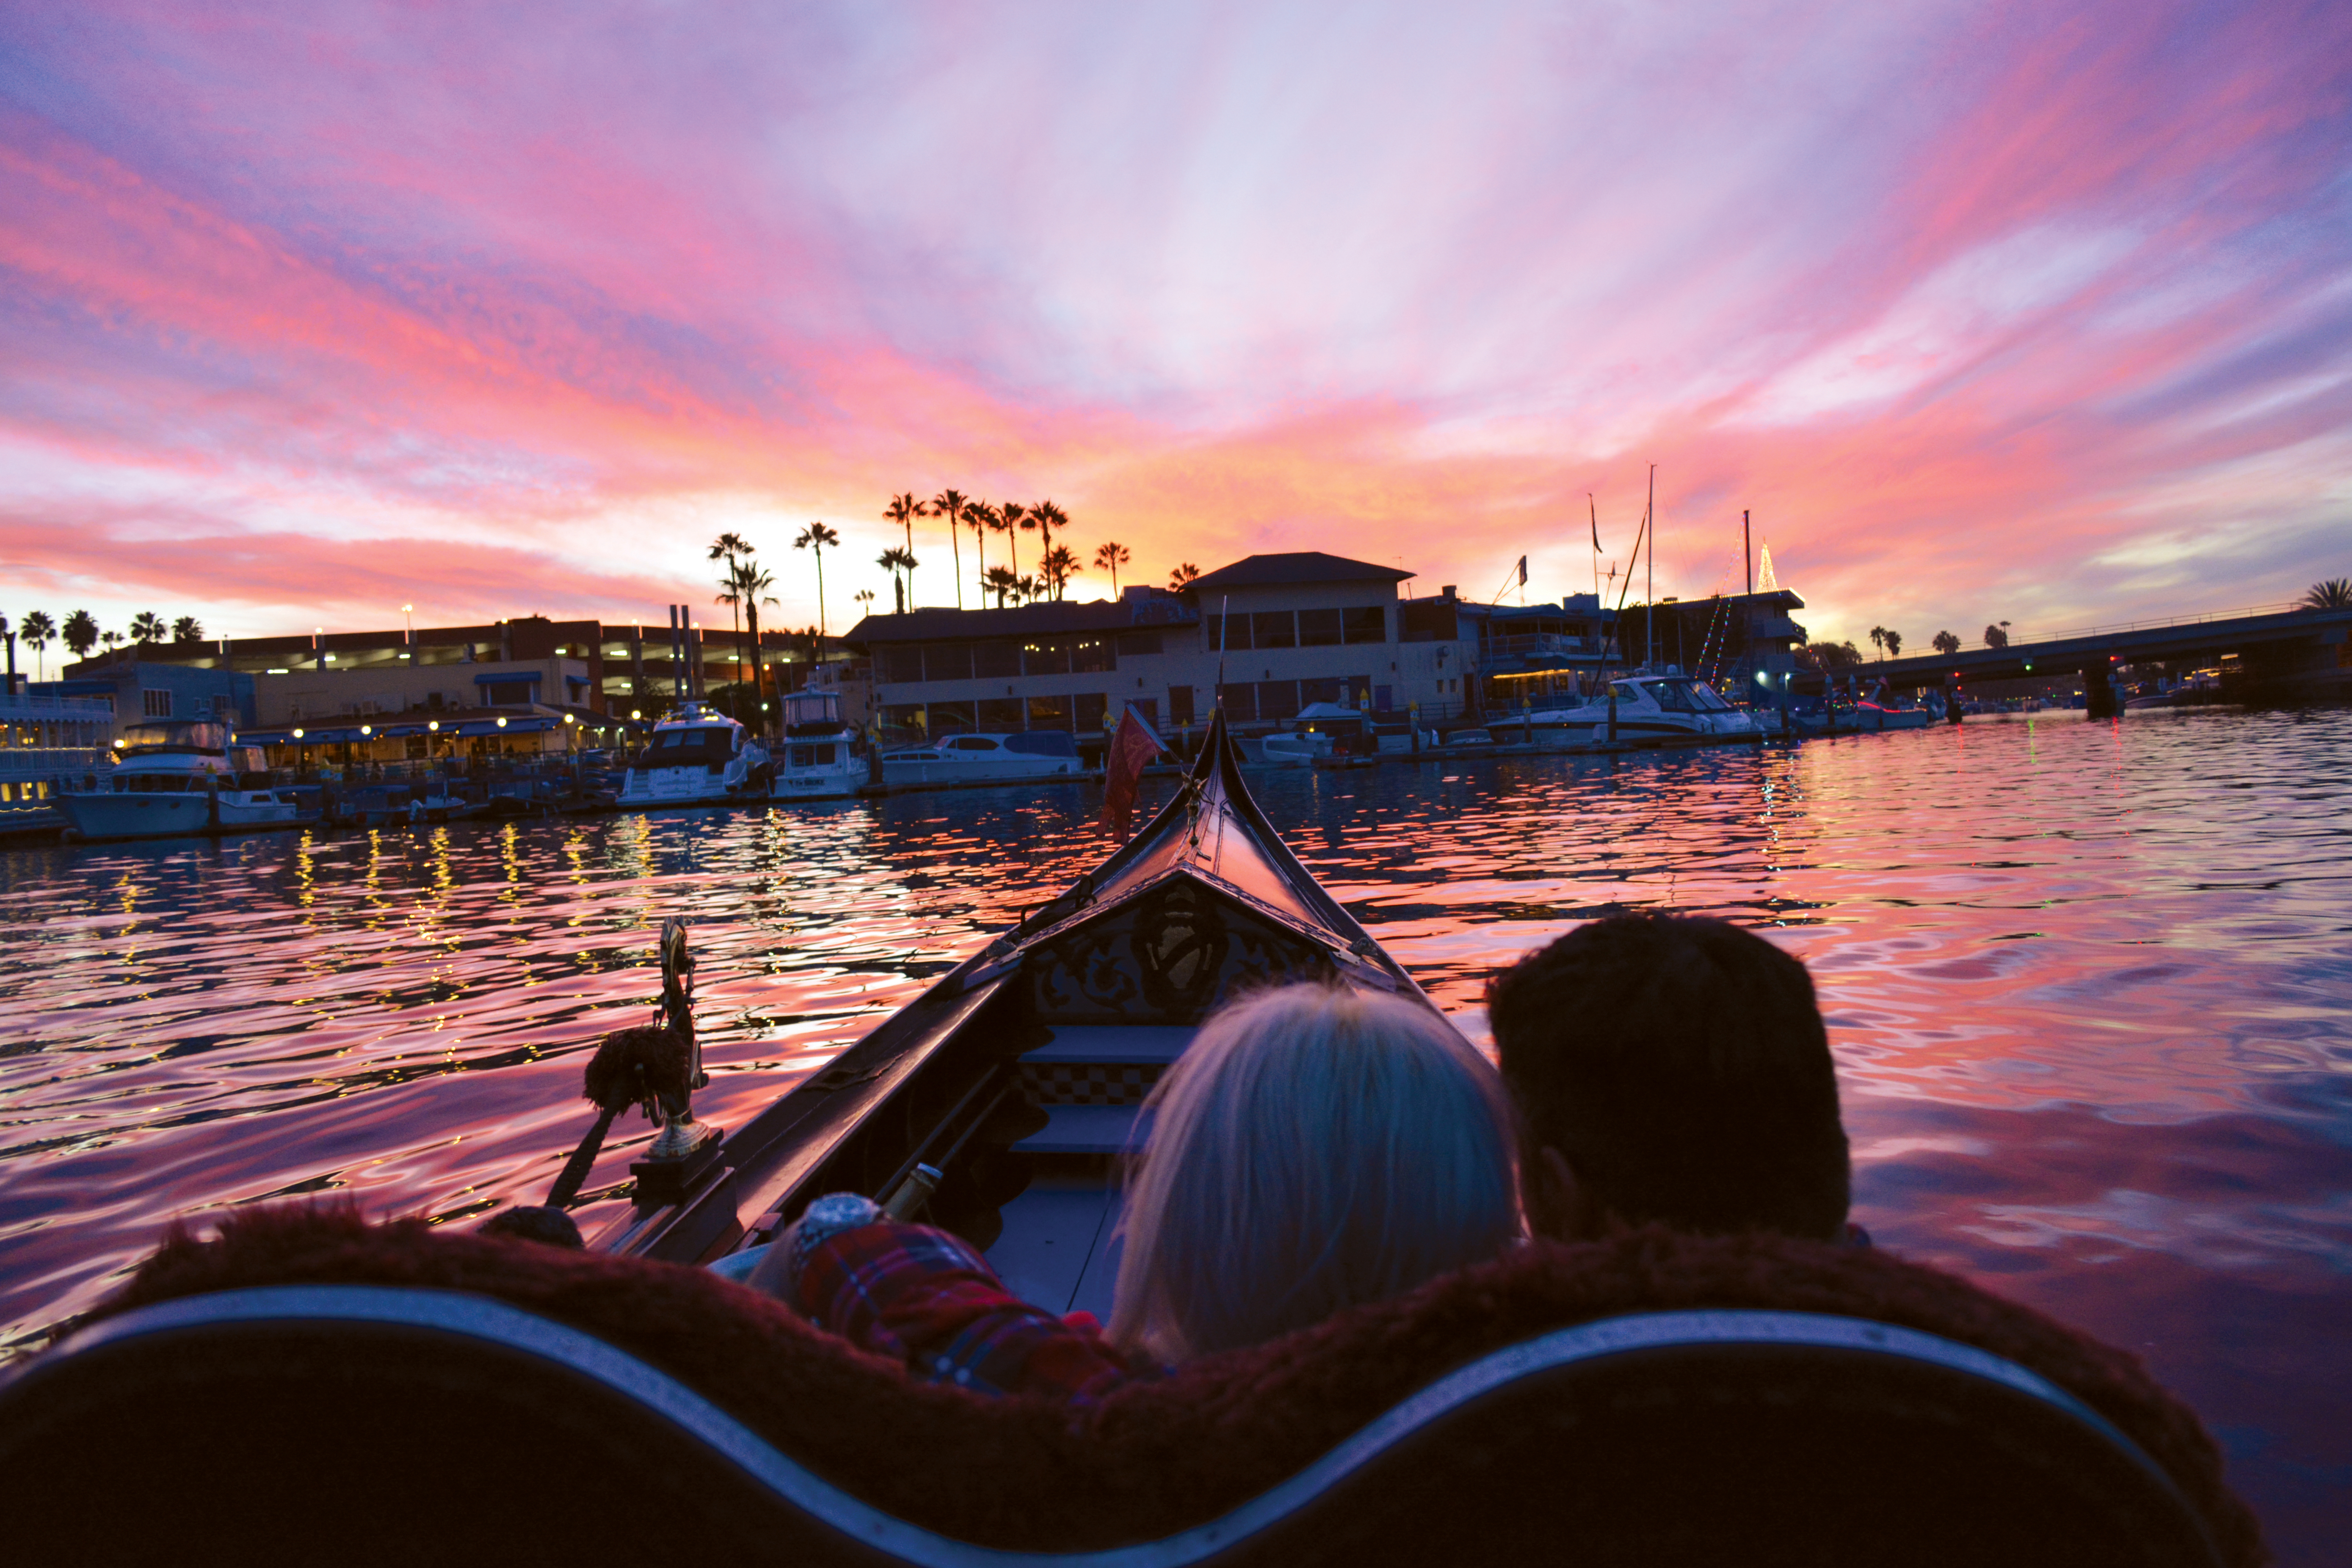 Newport Beach, CA Attractions & Things to Do